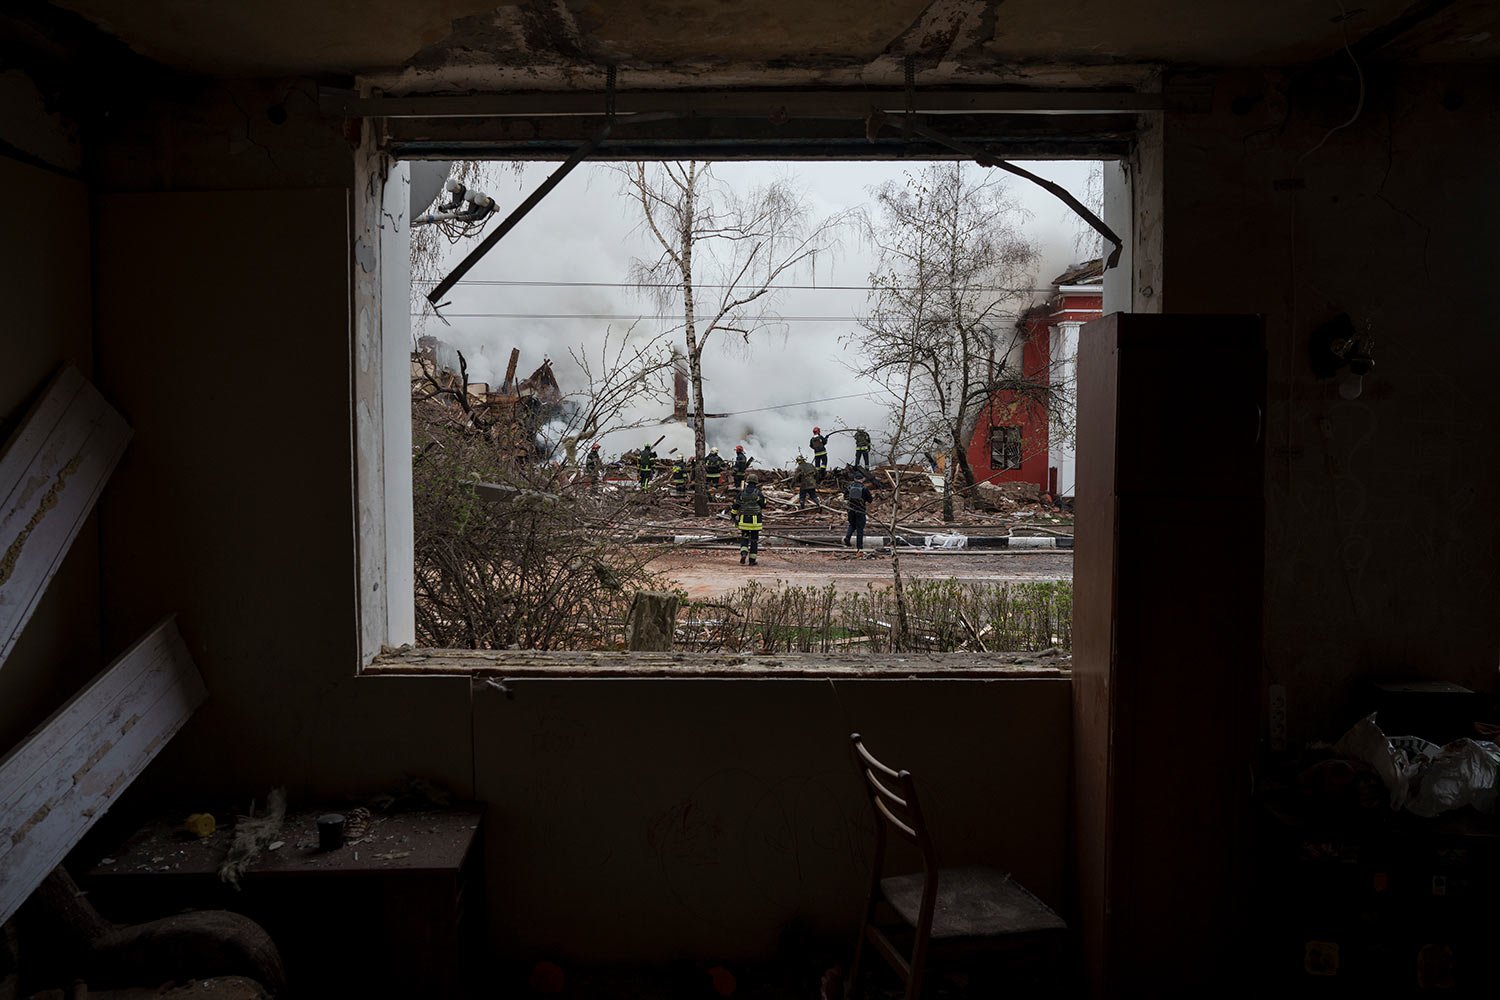  Firefighters are seen through the destroyed window of an apartment as they work to extinguish a fire after a Russian attack in Kharkiv, Ukraine, Tuesday, April 12, 2022. (AP Photo/Felipe Dana) 